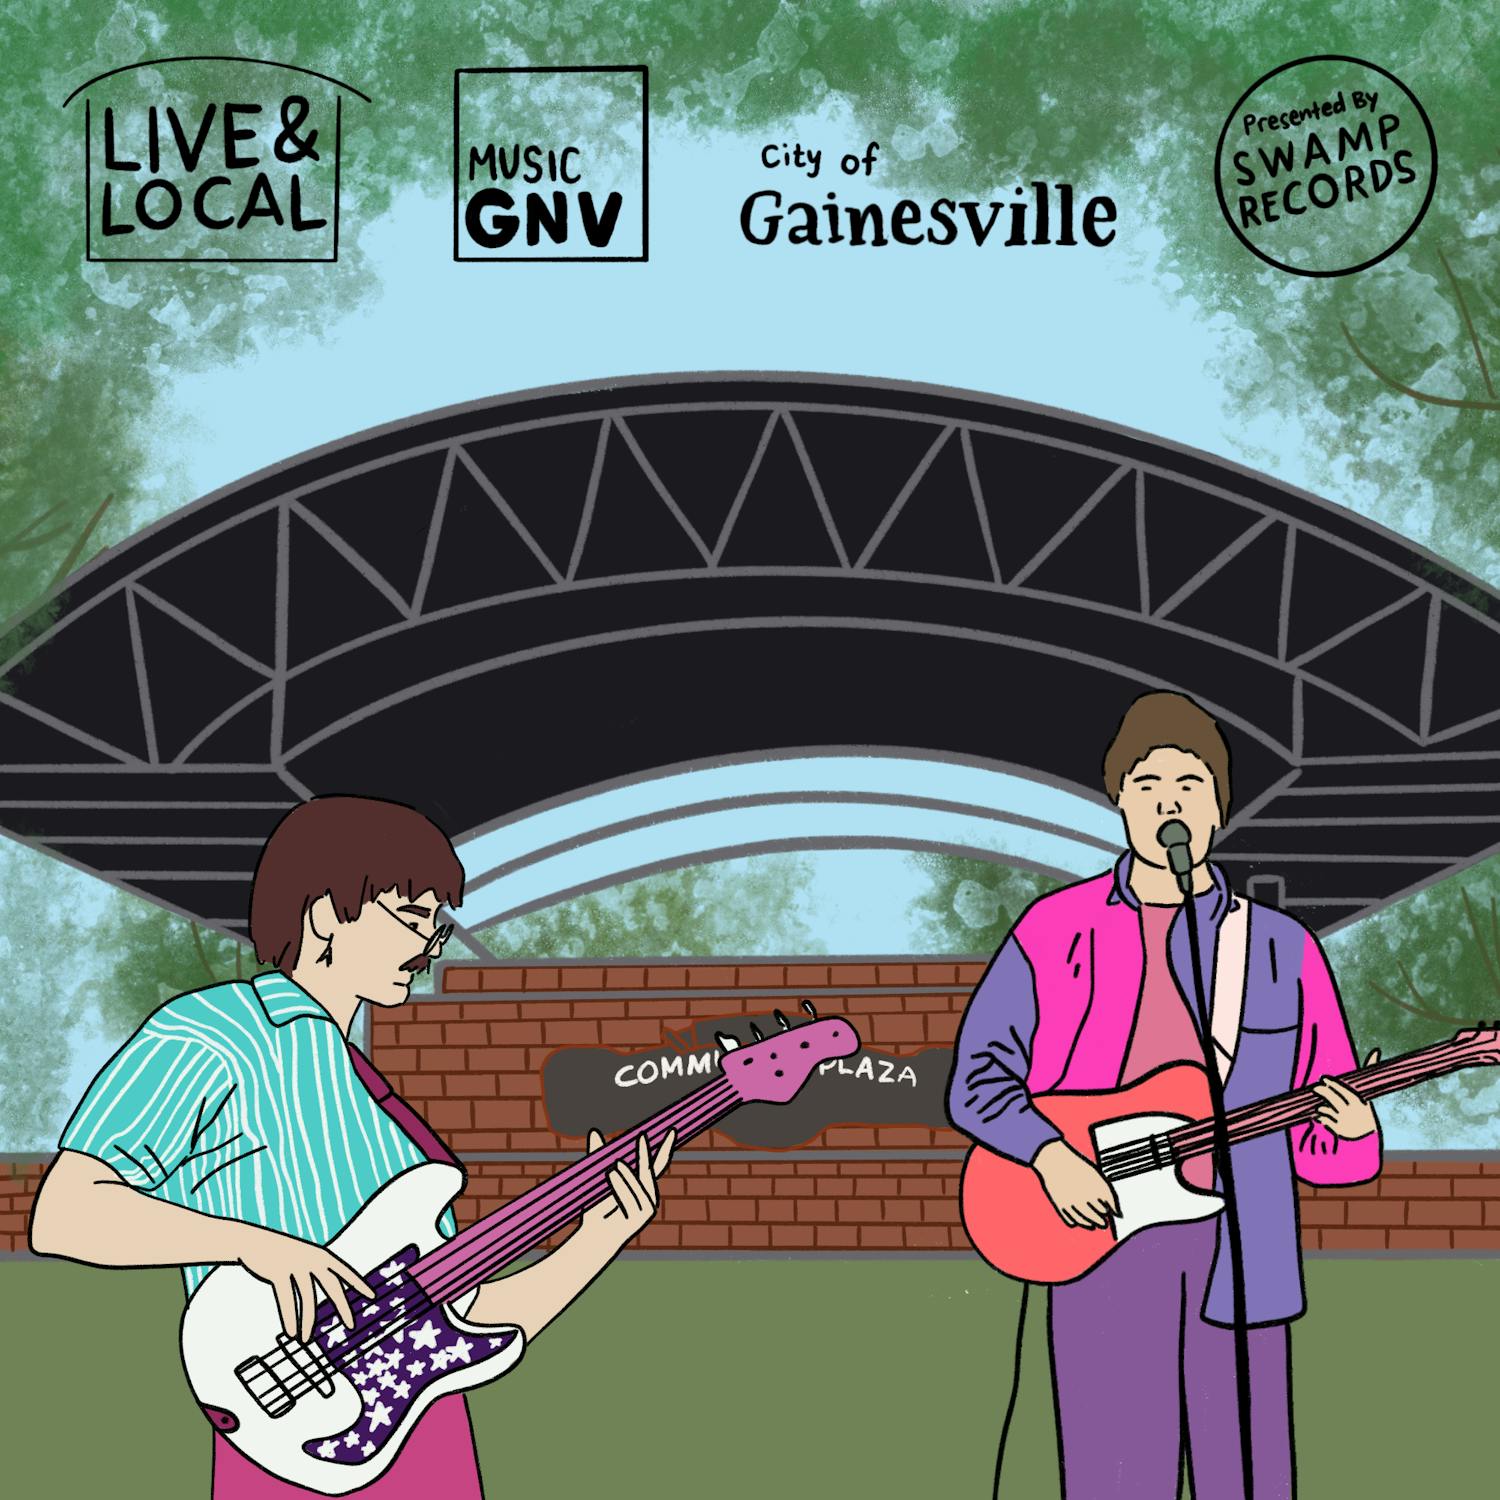 The Live and Local series was founded by MusicGNV, a local nonprofit dedicated to promoting Gainesville musicians.